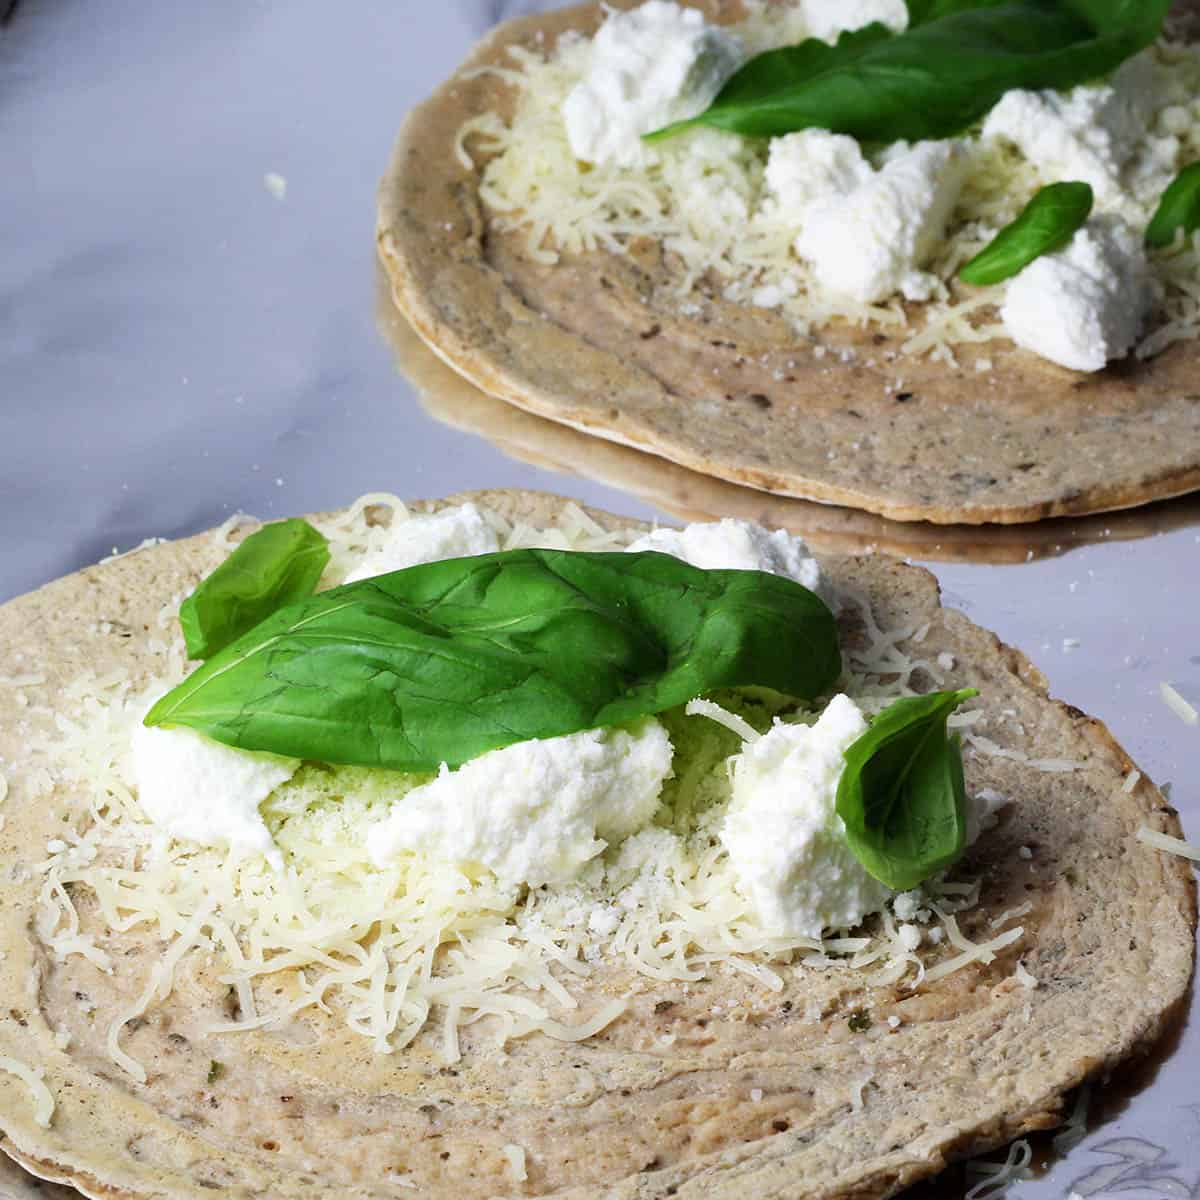 white protein pizza wraps before they are wrapped, with ricotta, mozzarella, and basil leaves